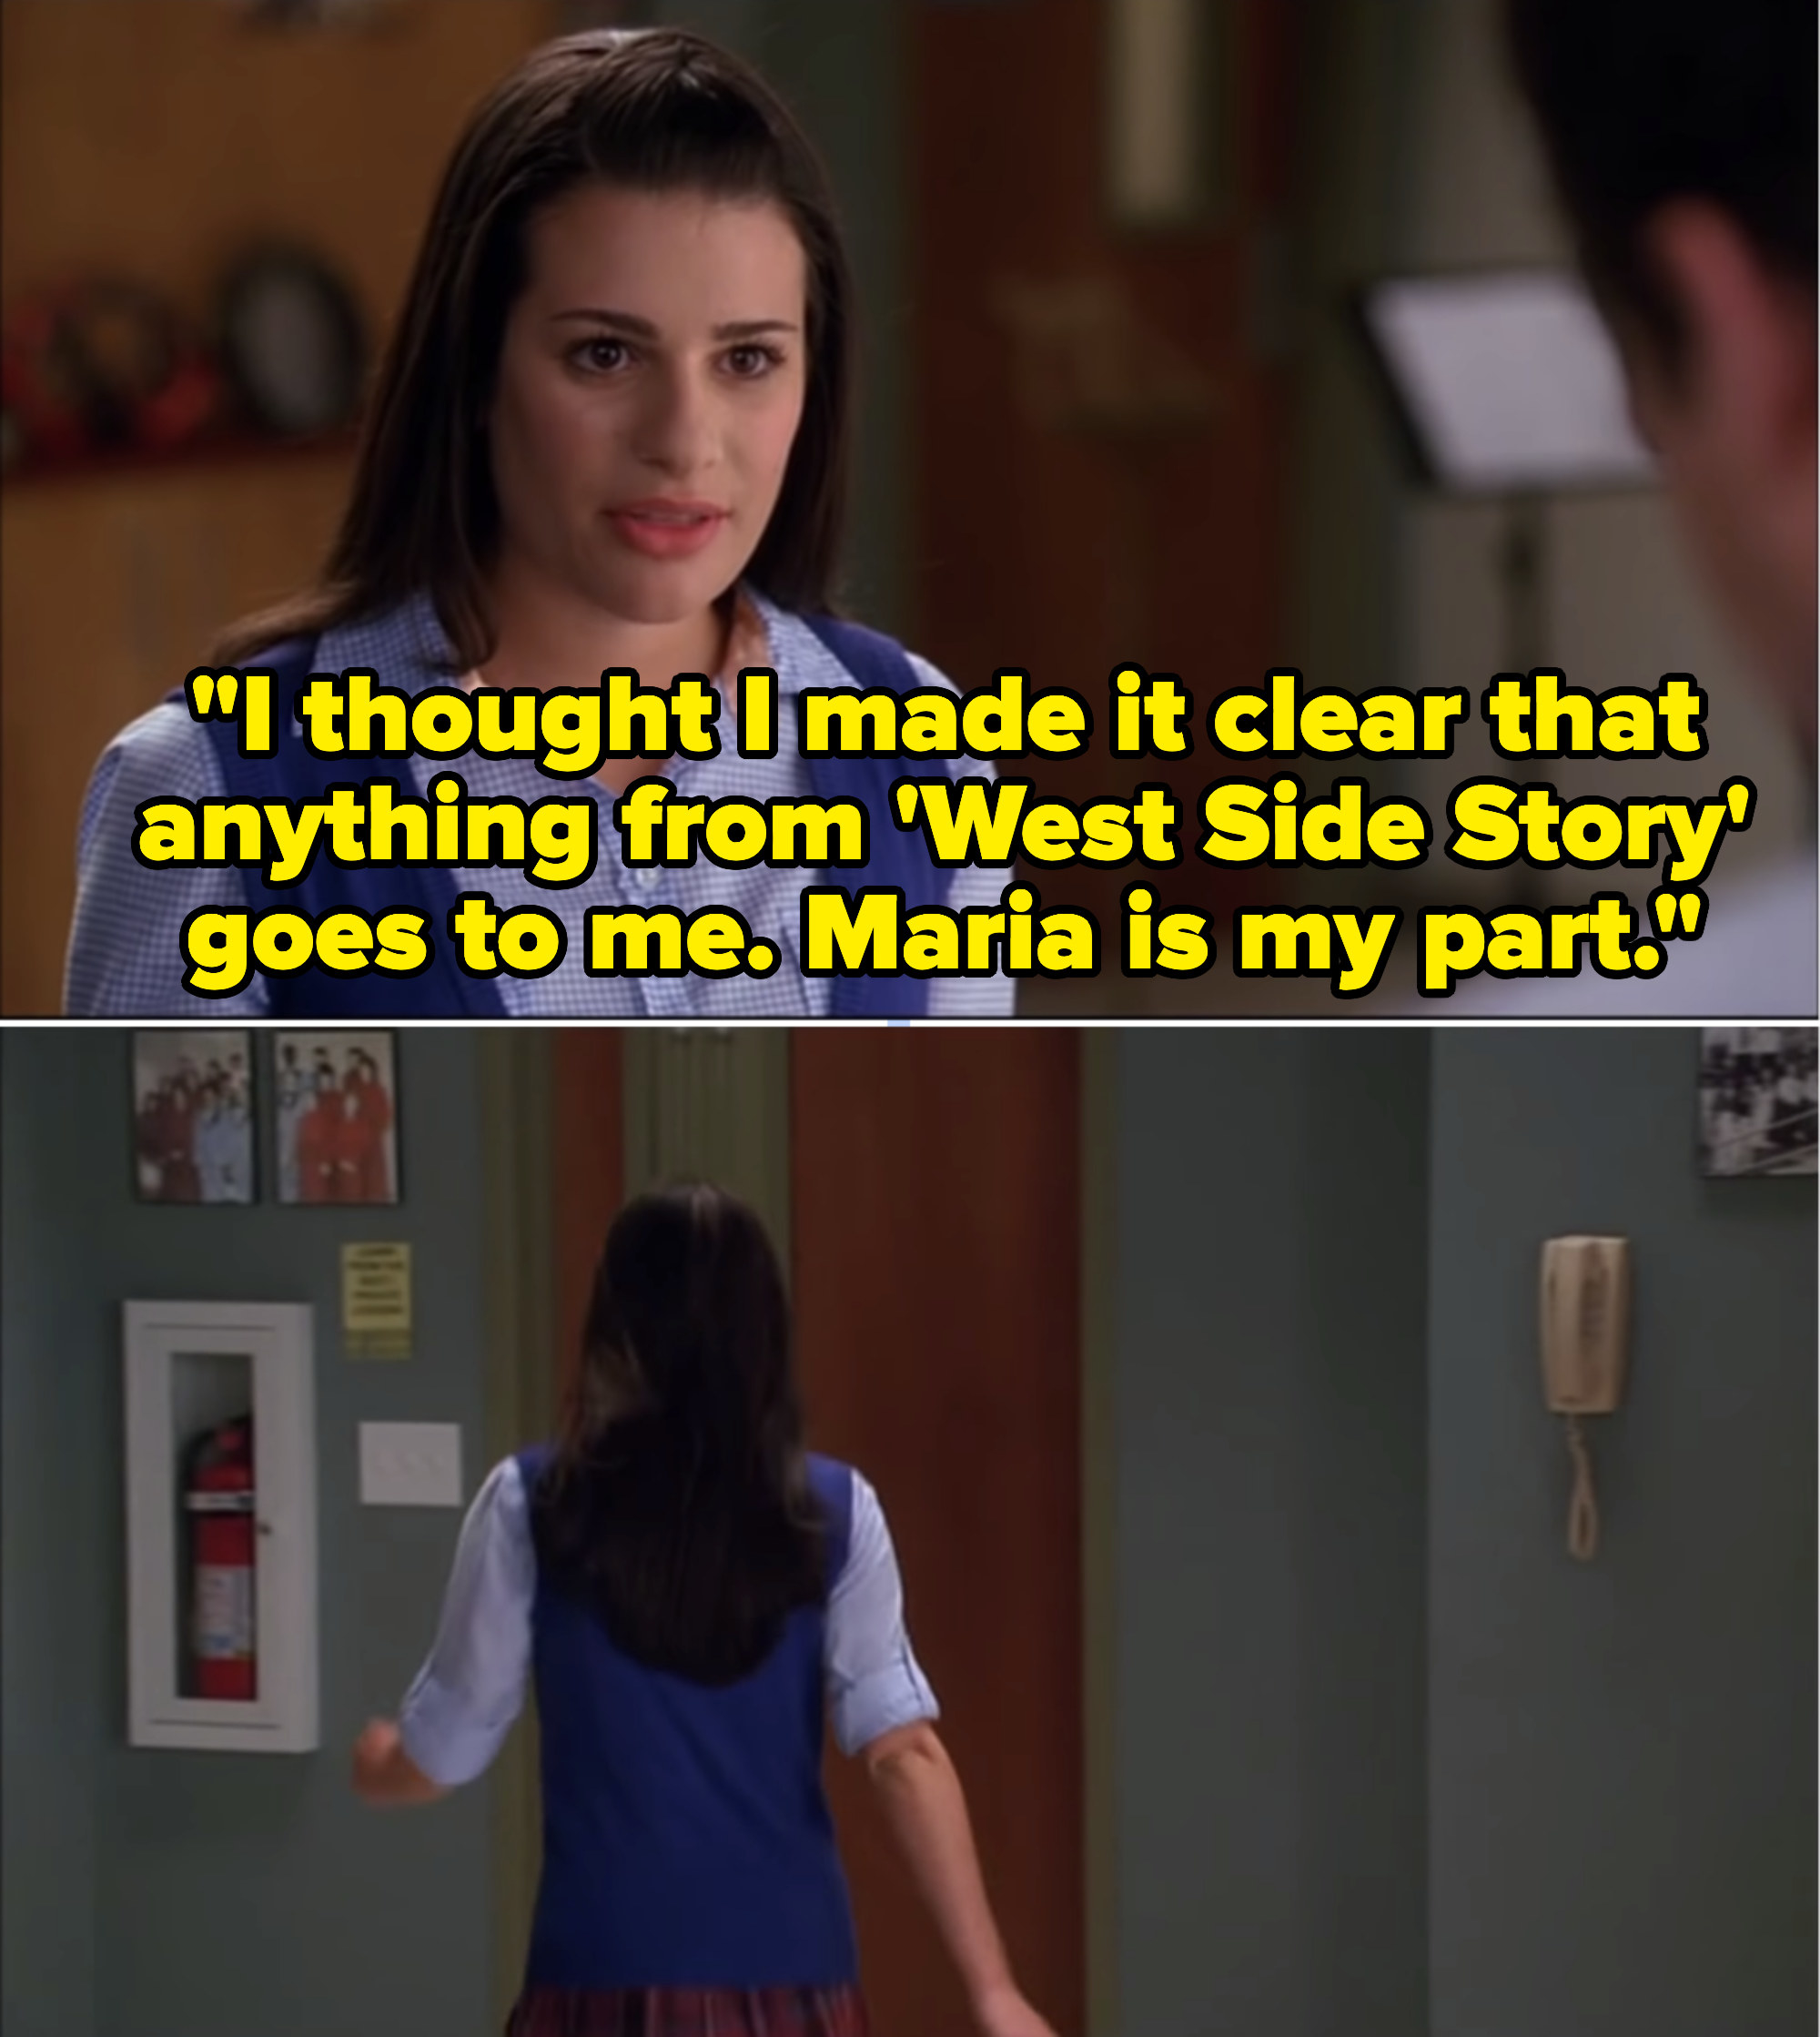 Rachel confronts Mr. Schuester, then storms out of the room.